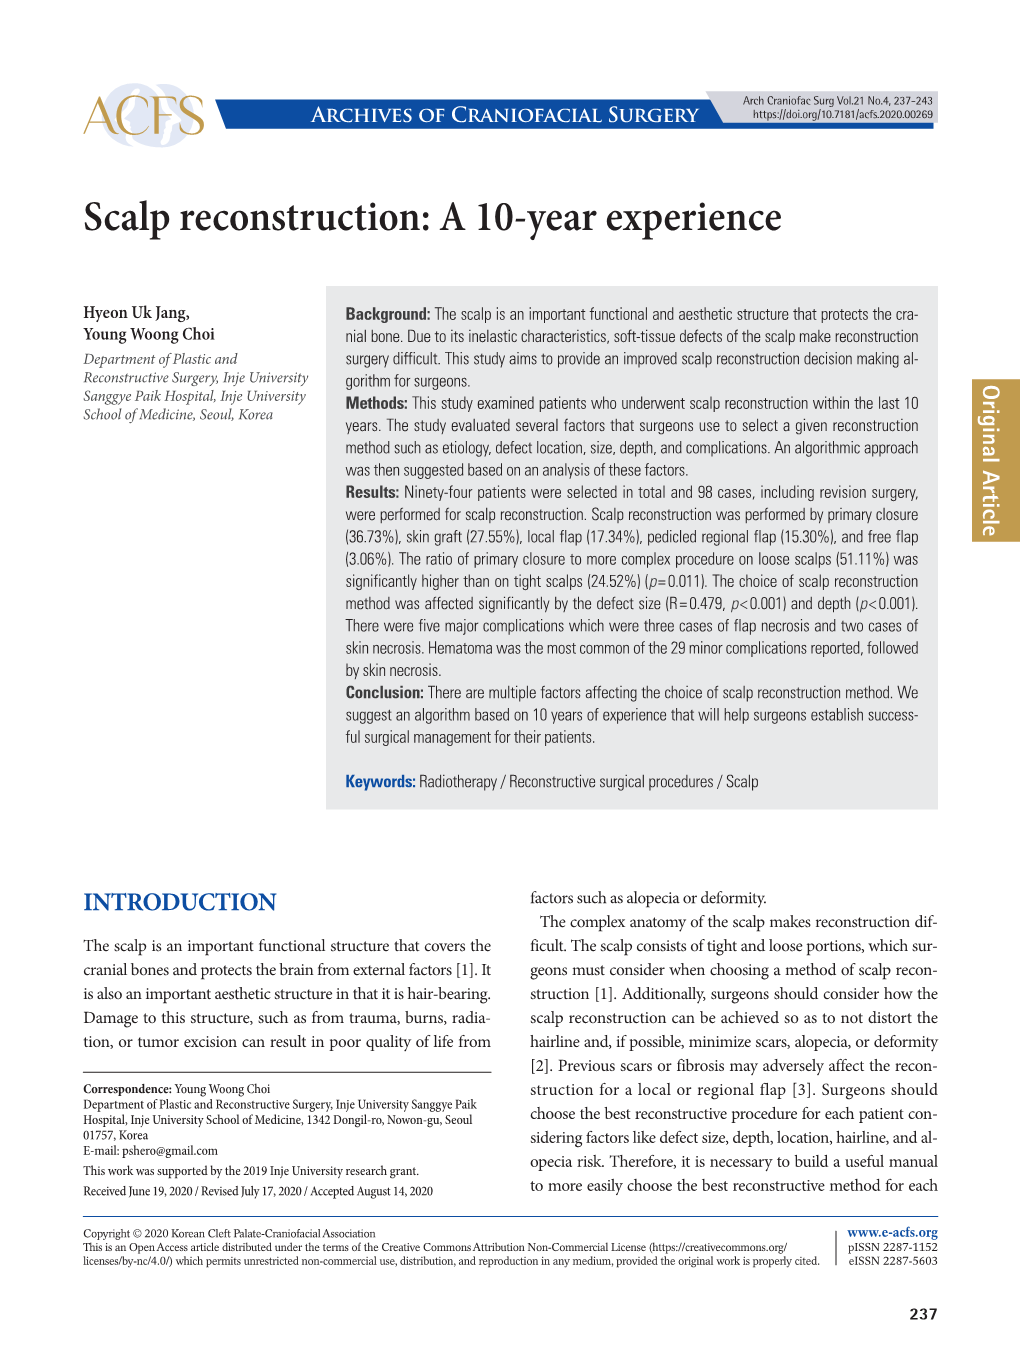 Scalp Reconstruction: a 10-Year Experience